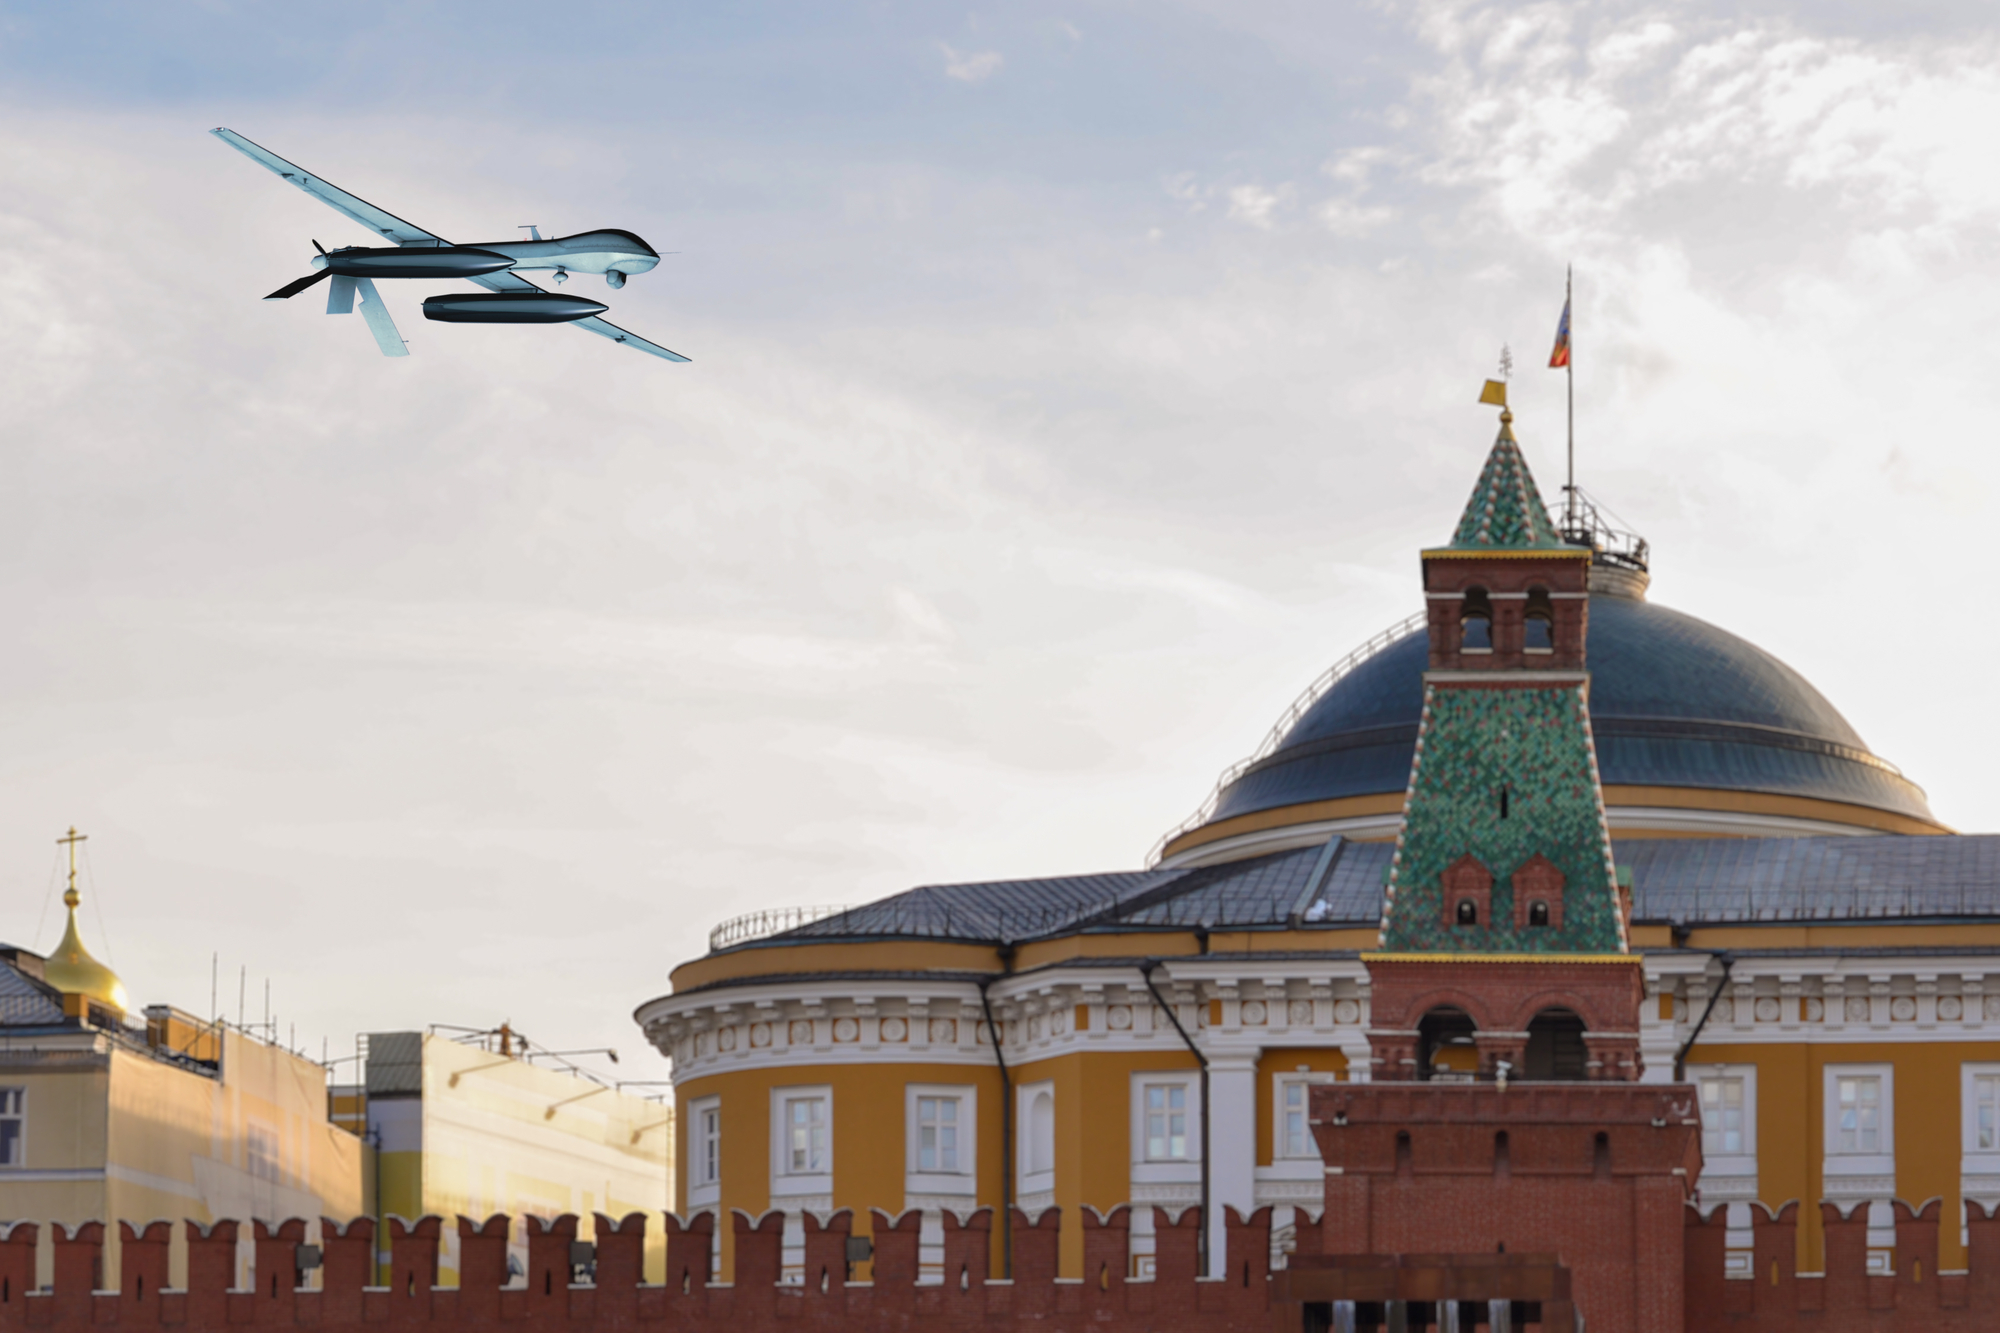 drone attack on the Kremlin